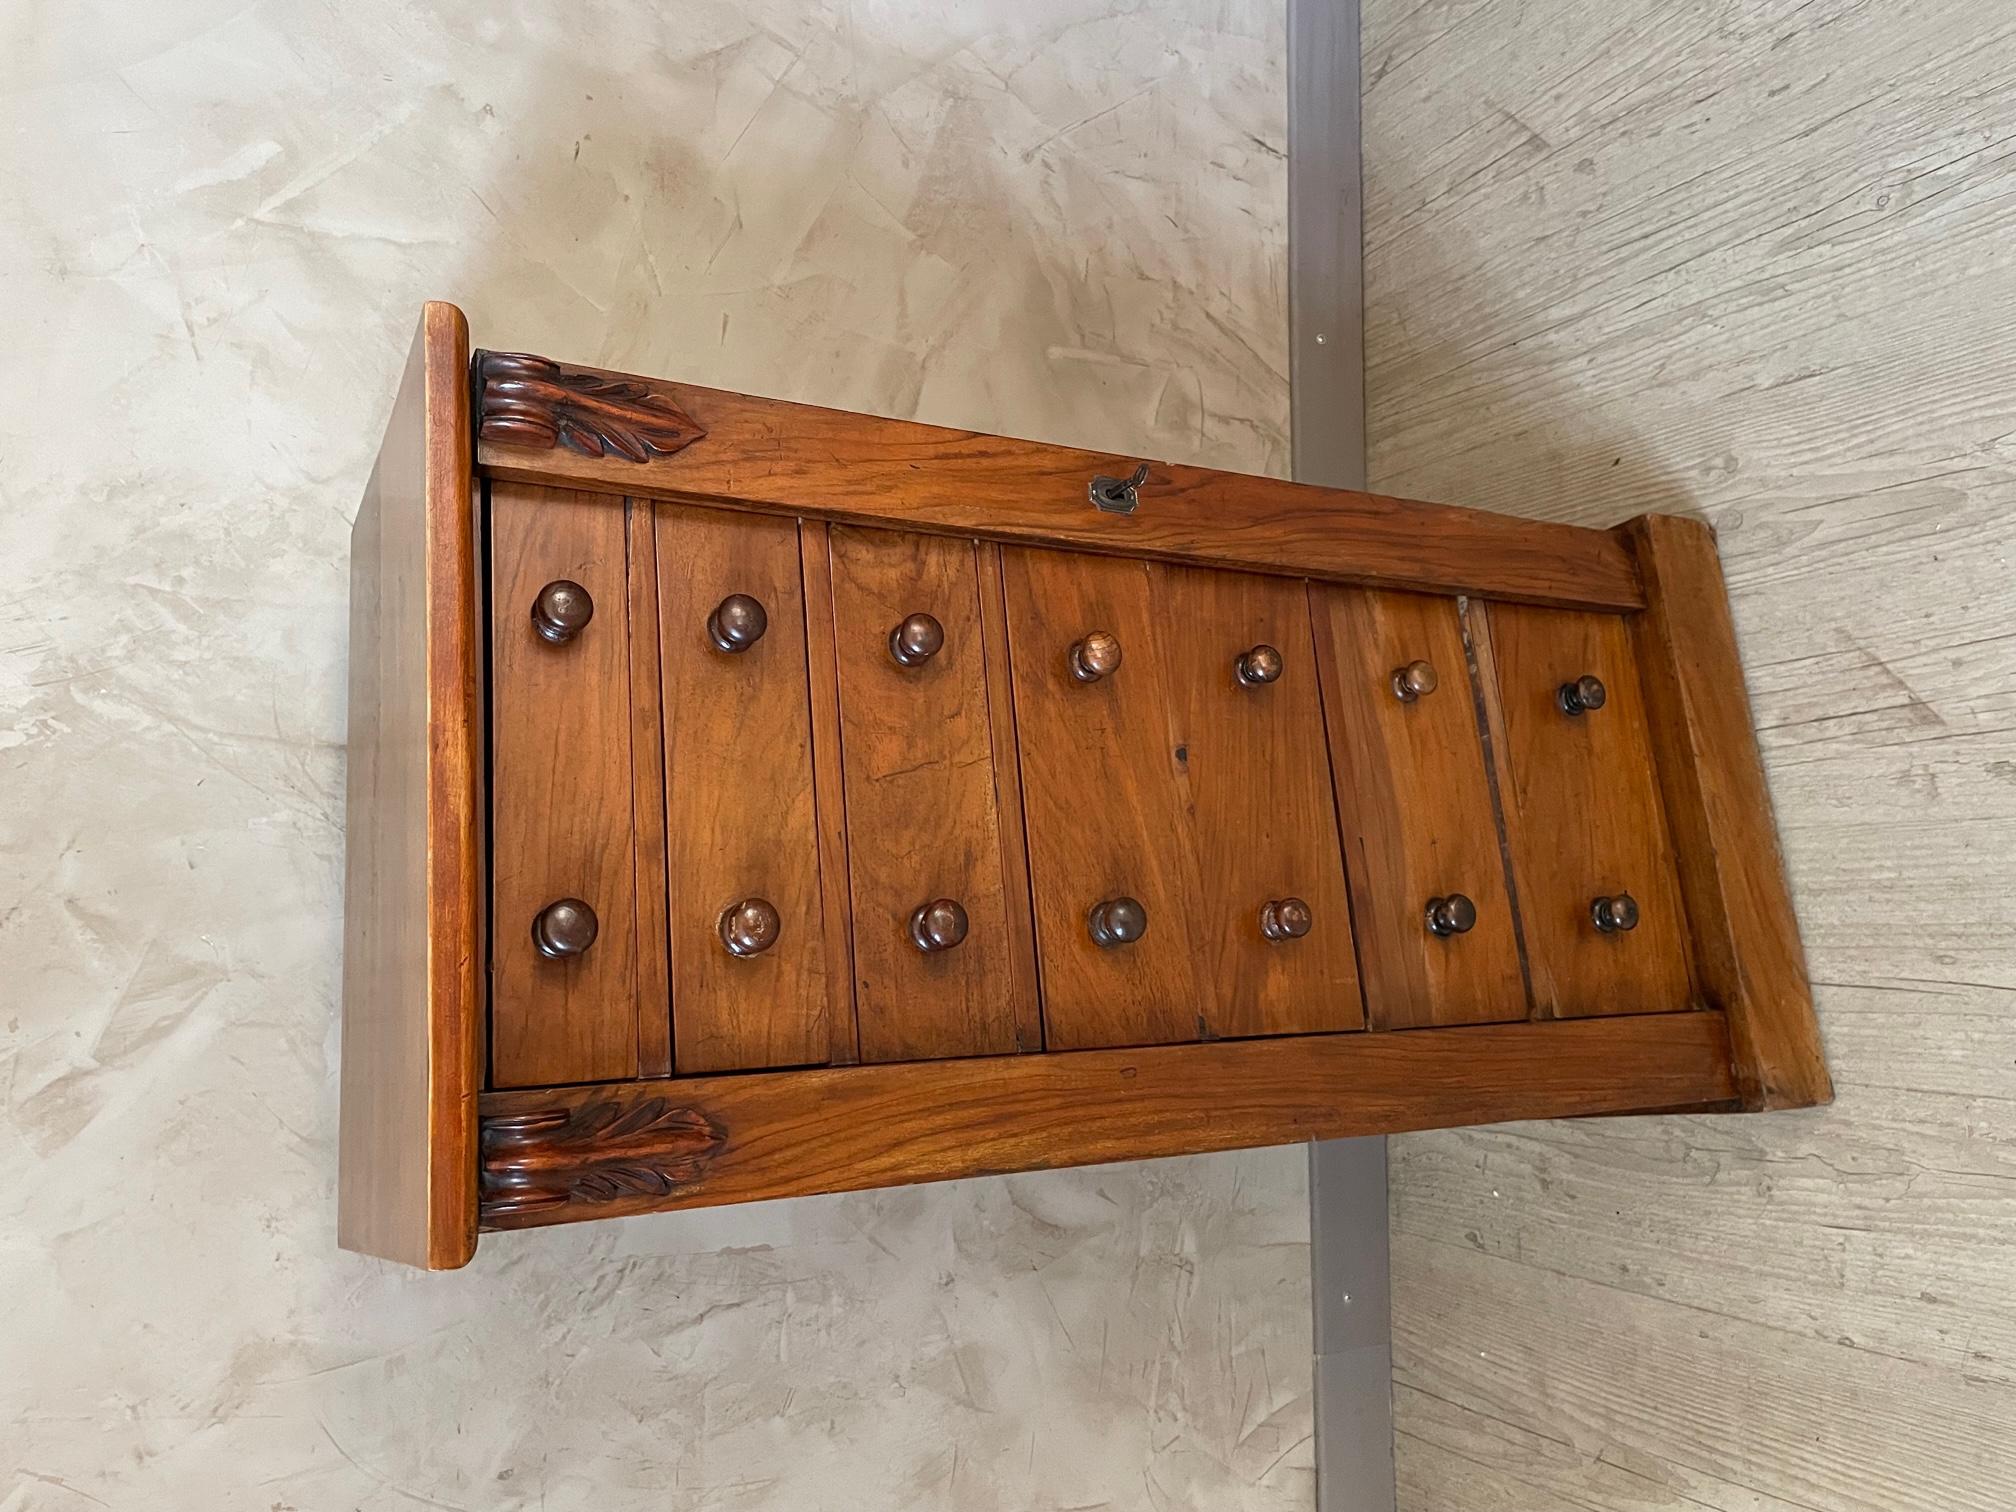 Pretty 1920 walnut semainier chest of drawer with flap on the right with lock to close all the drawers. Nice quality.